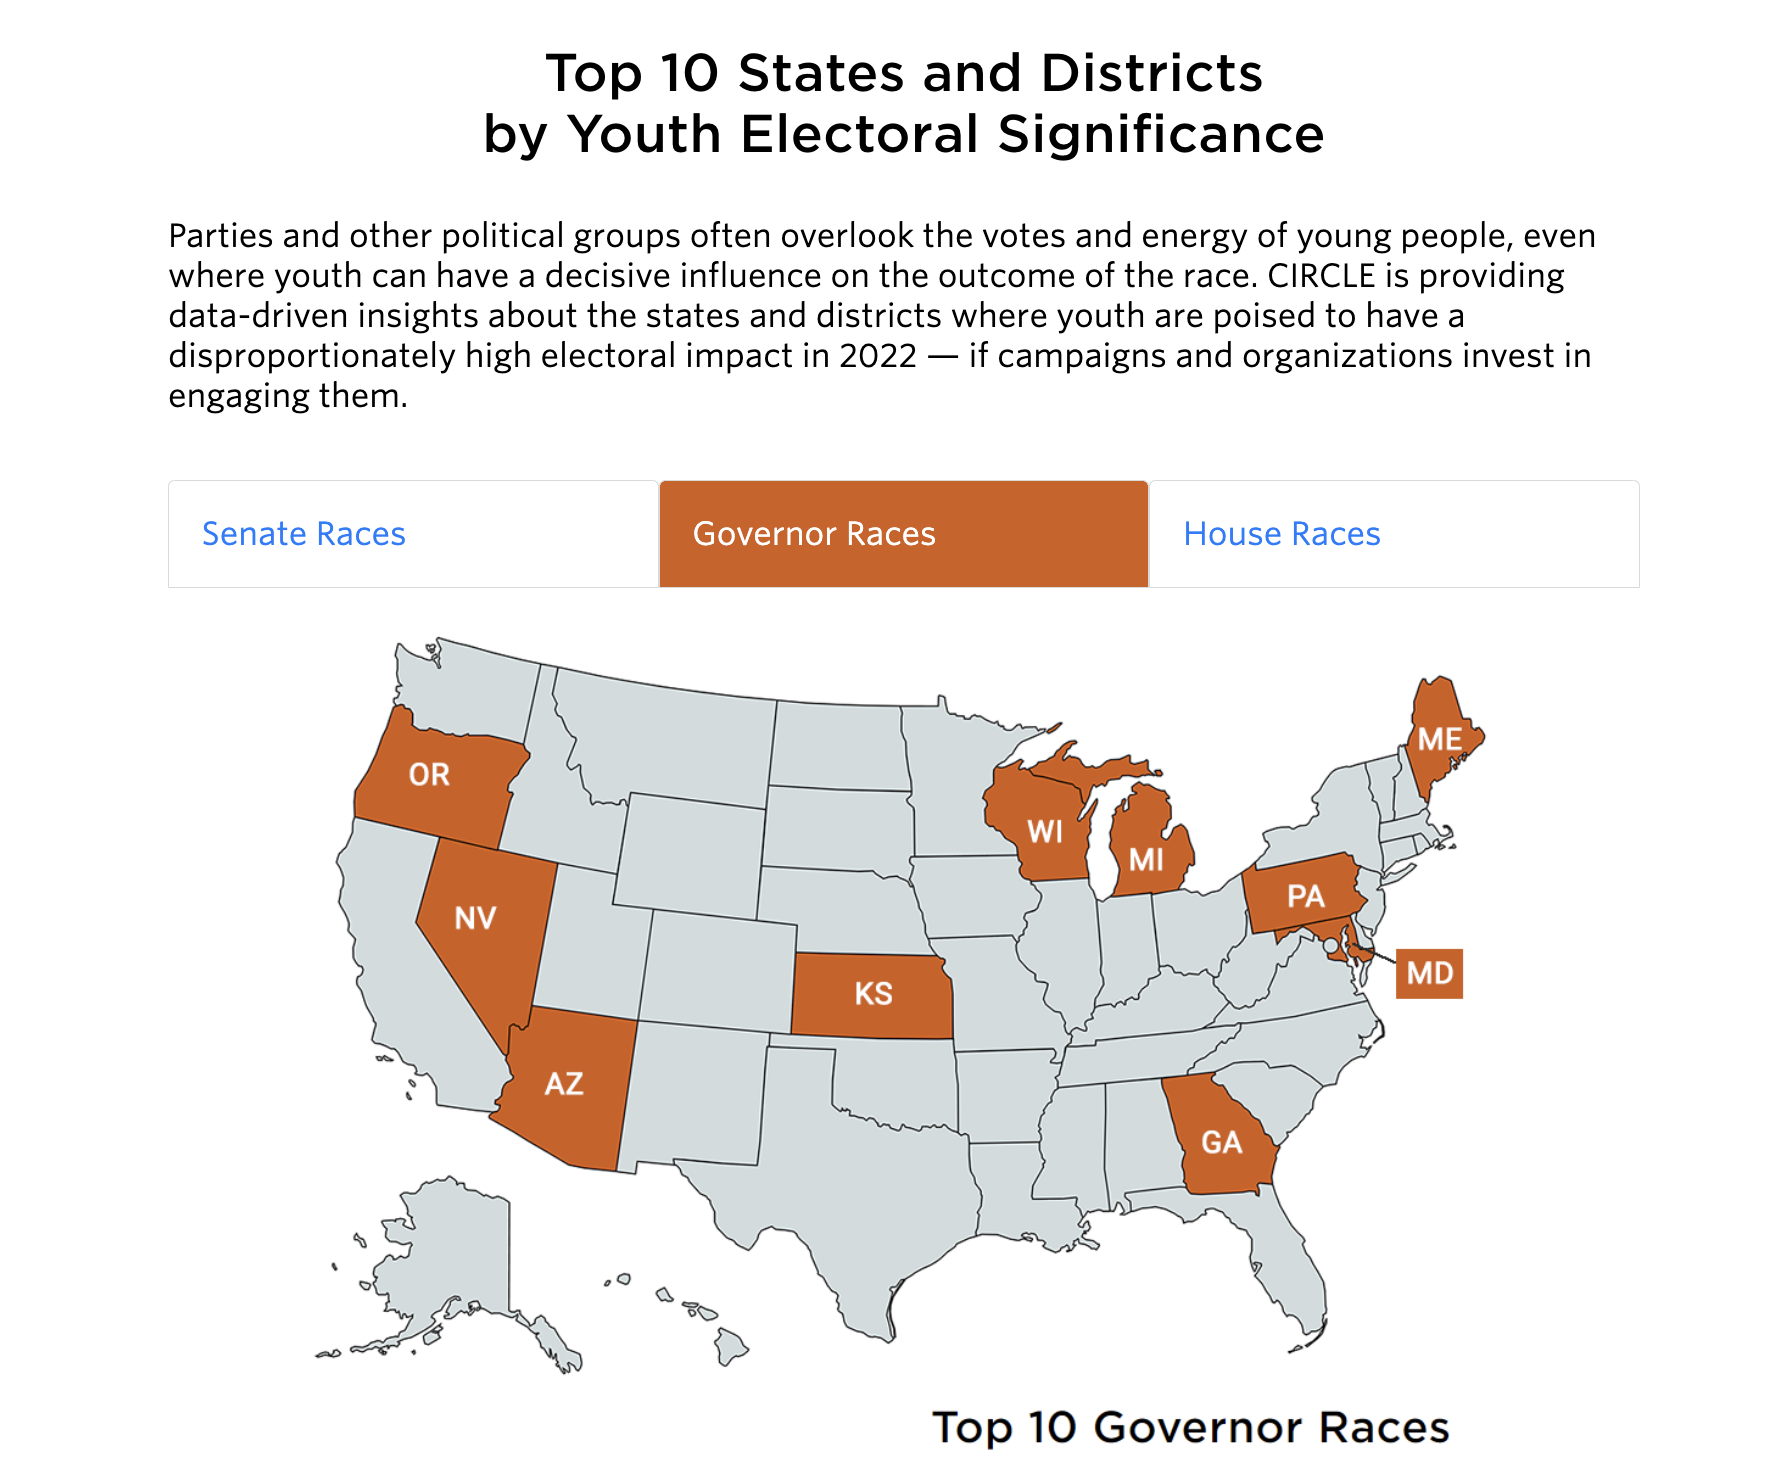 Data by Center for Information and Research on Civic Learning & Engagement (CIRCLE) shows insights on youth electoral significance. Kansas was among the top 10 states and districts for young people engagement in a governor race. (Screenshot)